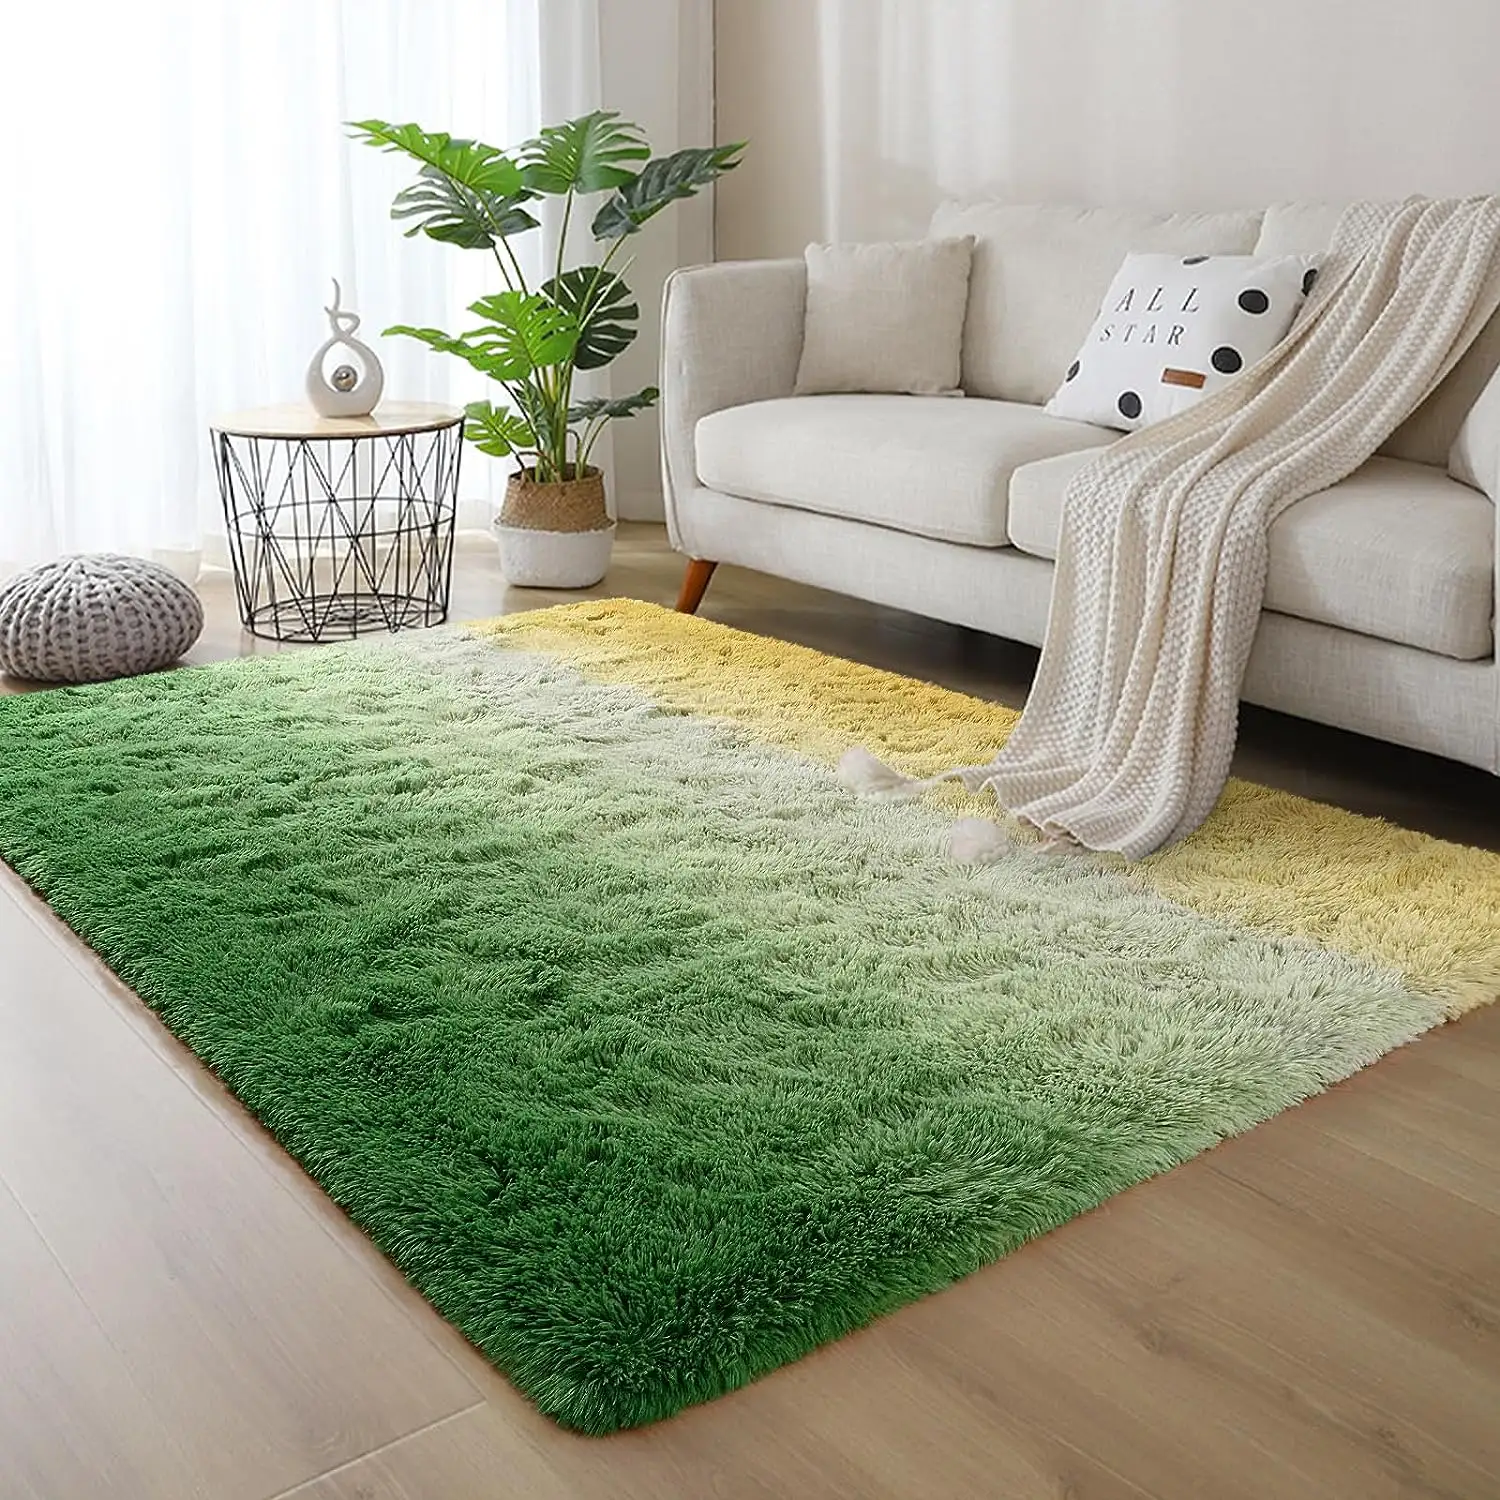 Shaggy Area Faux Plush Fur Fluffy Furry Rugs Carpet For Living Room